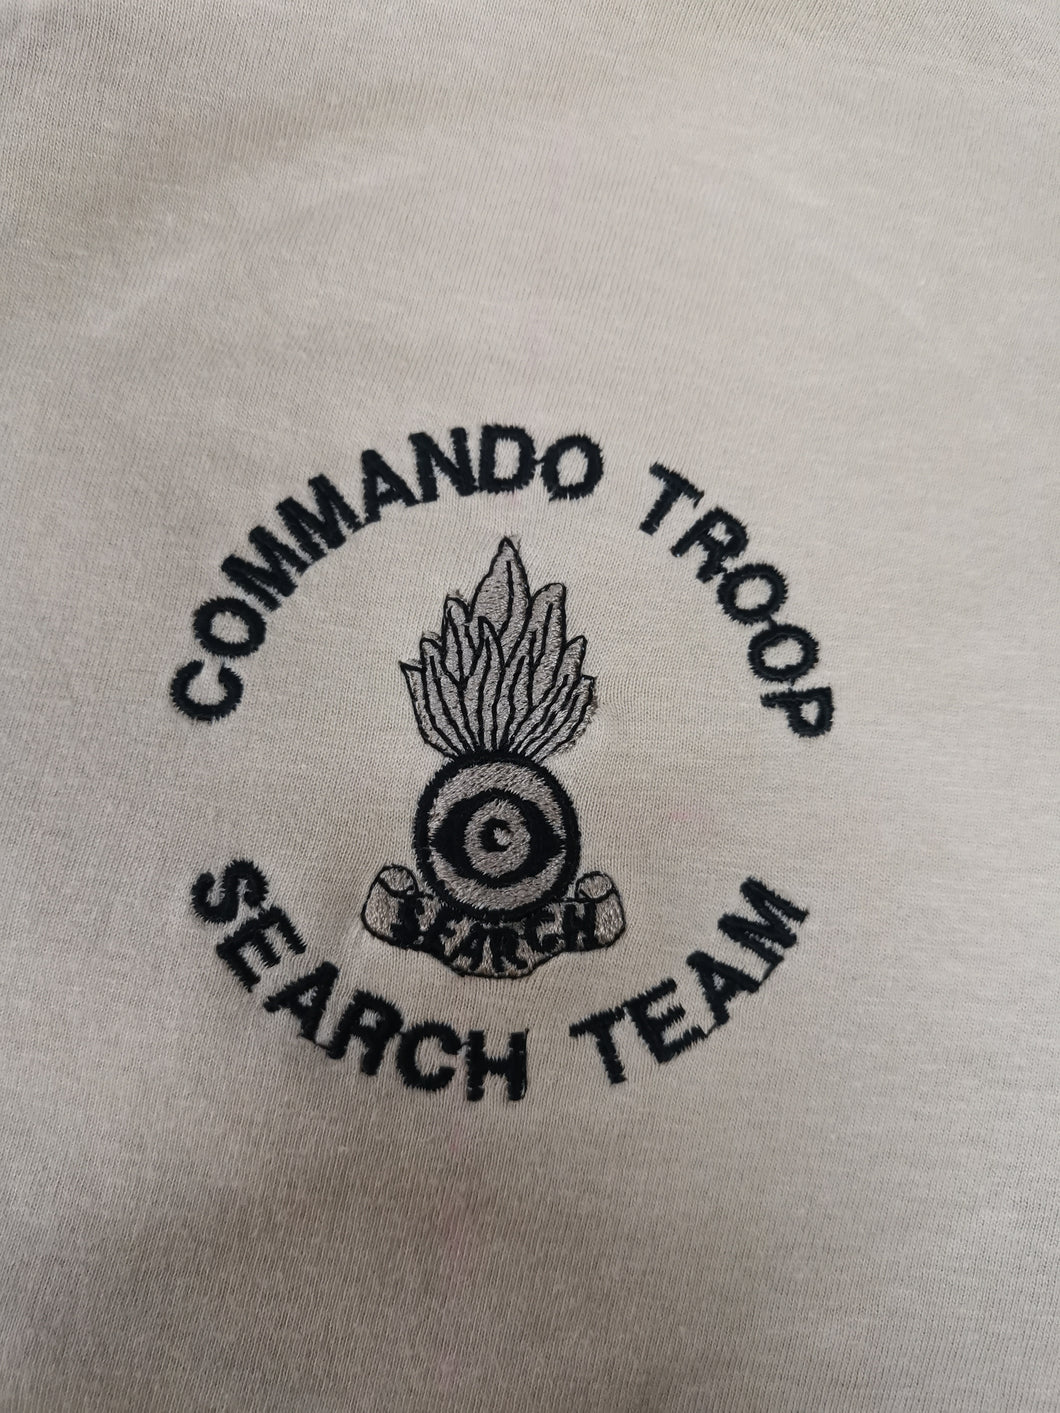 Commando Troop - Search Team - Embroidered Design - Choose your Garment